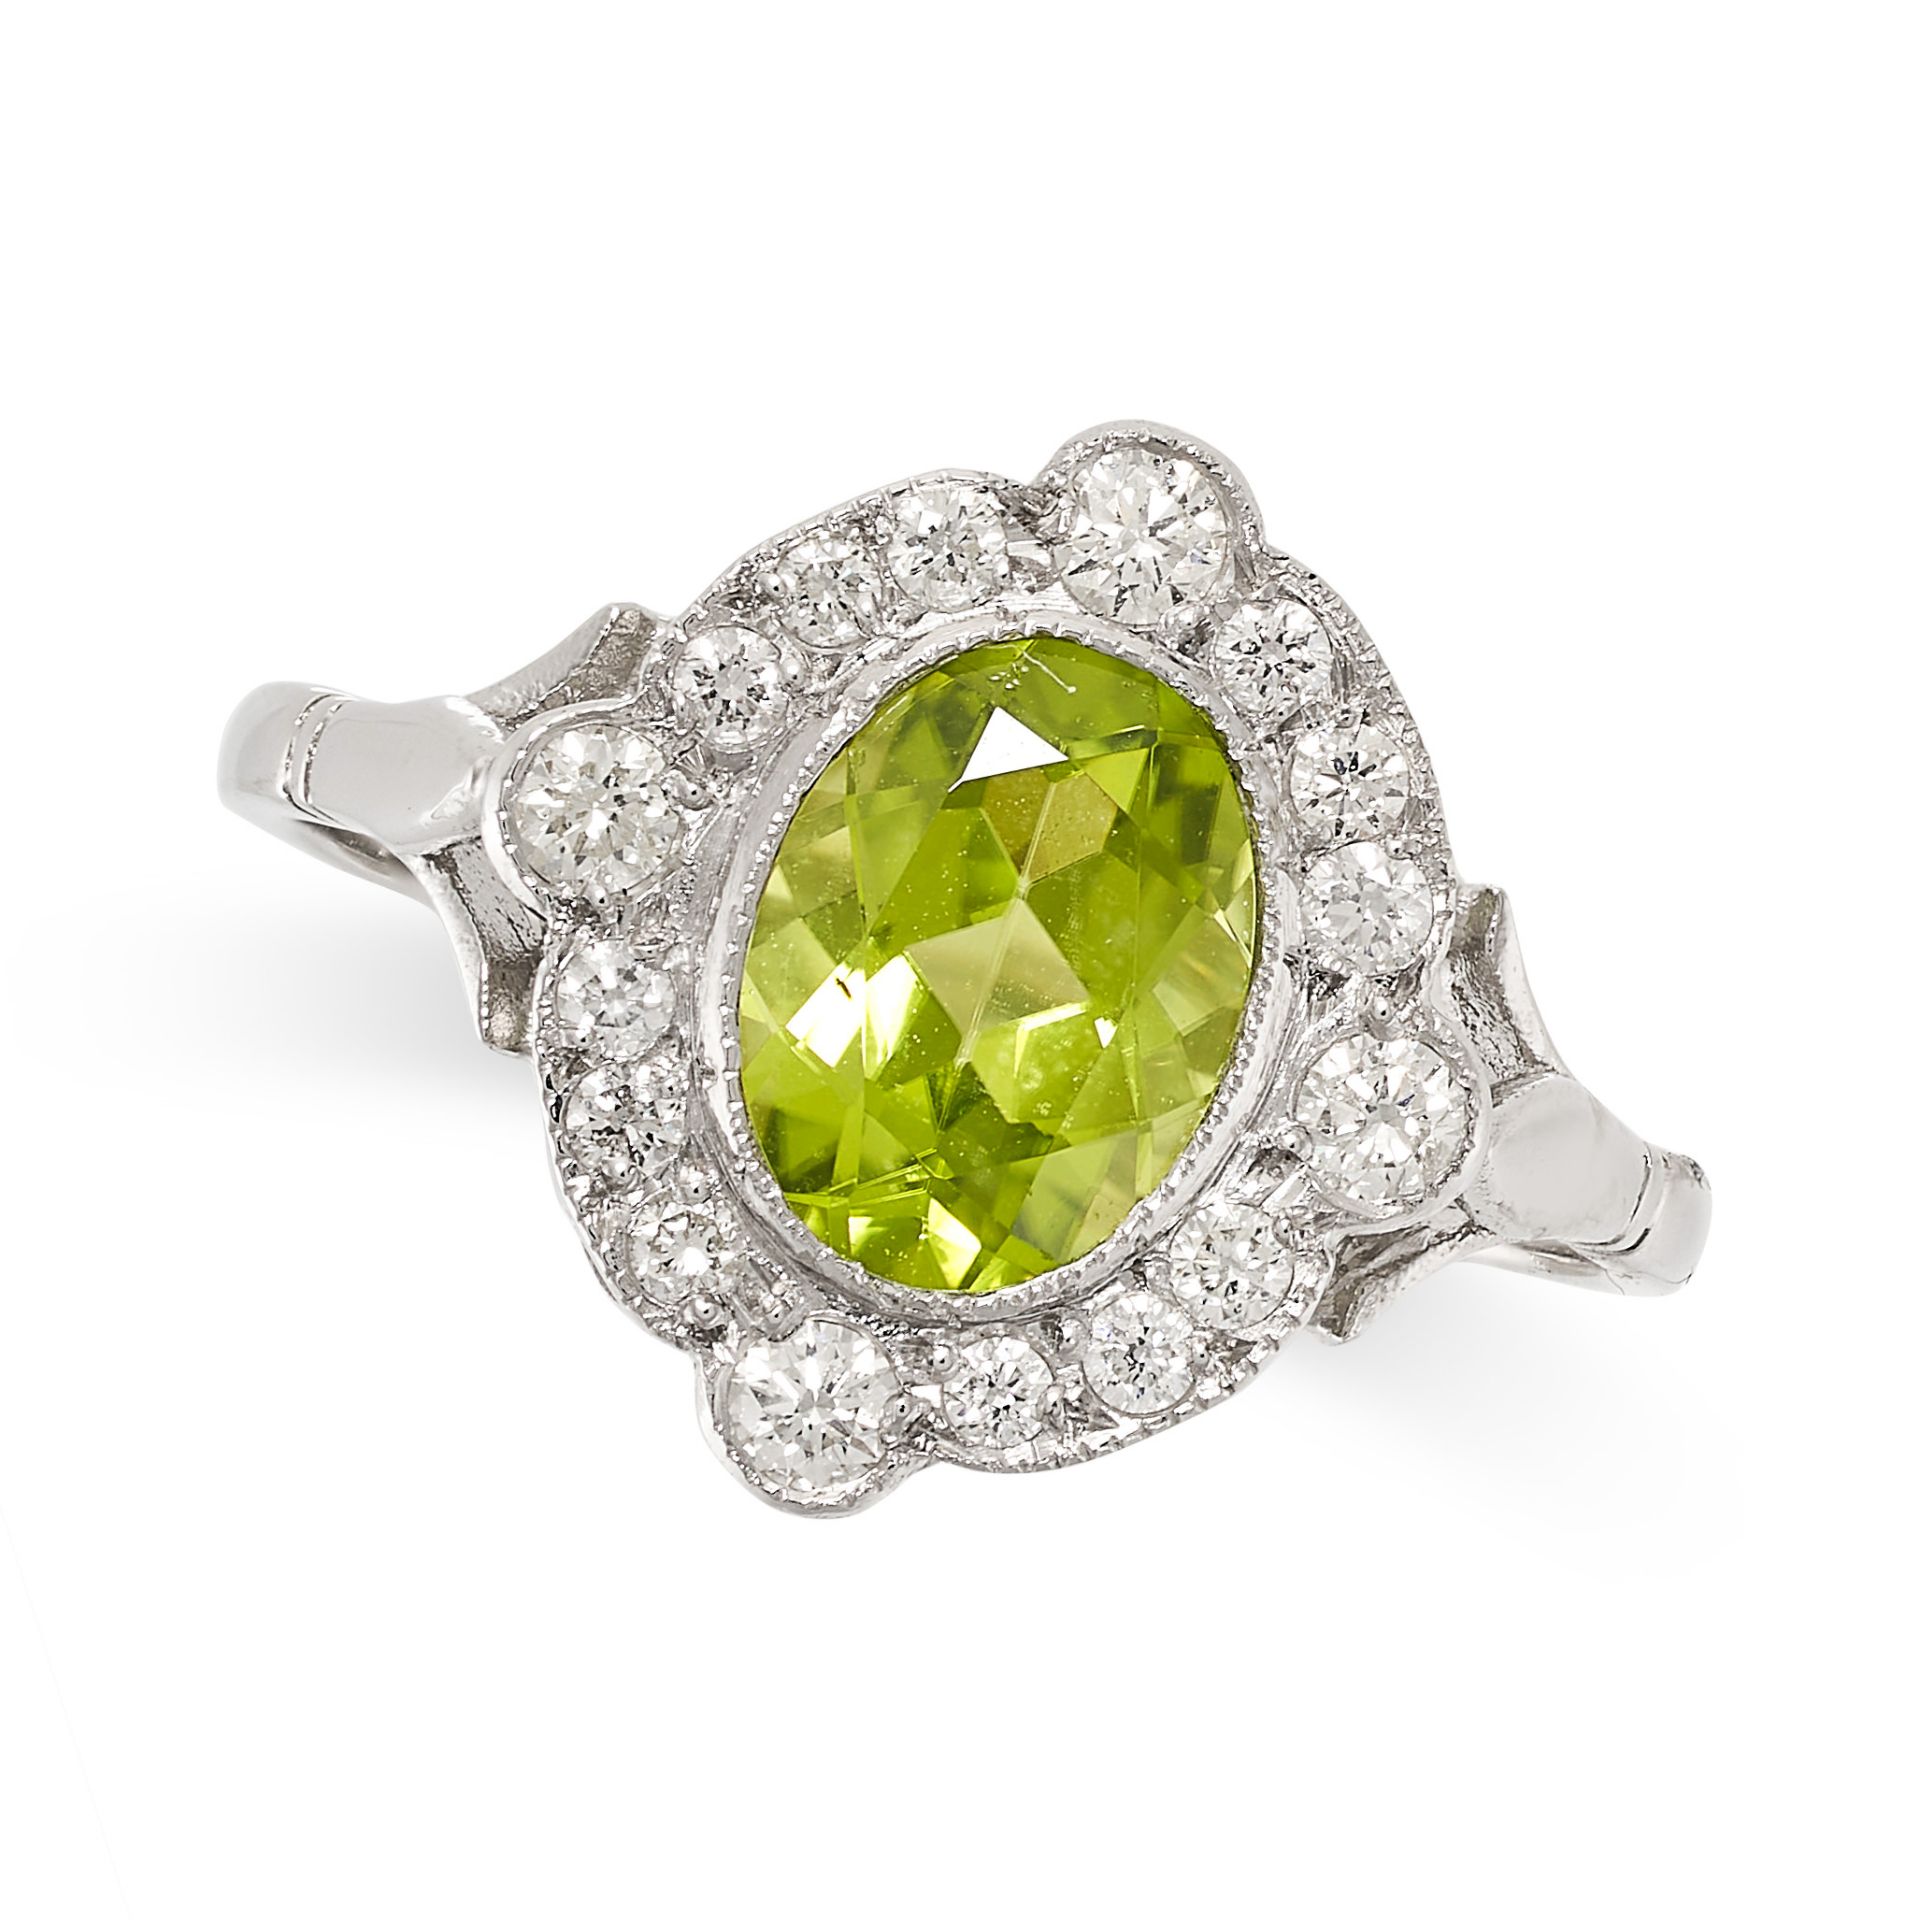 A PERIDOT AND DIAMOND CLUSTER DRESS RING in platinum, set with an oval cut peridot within a border